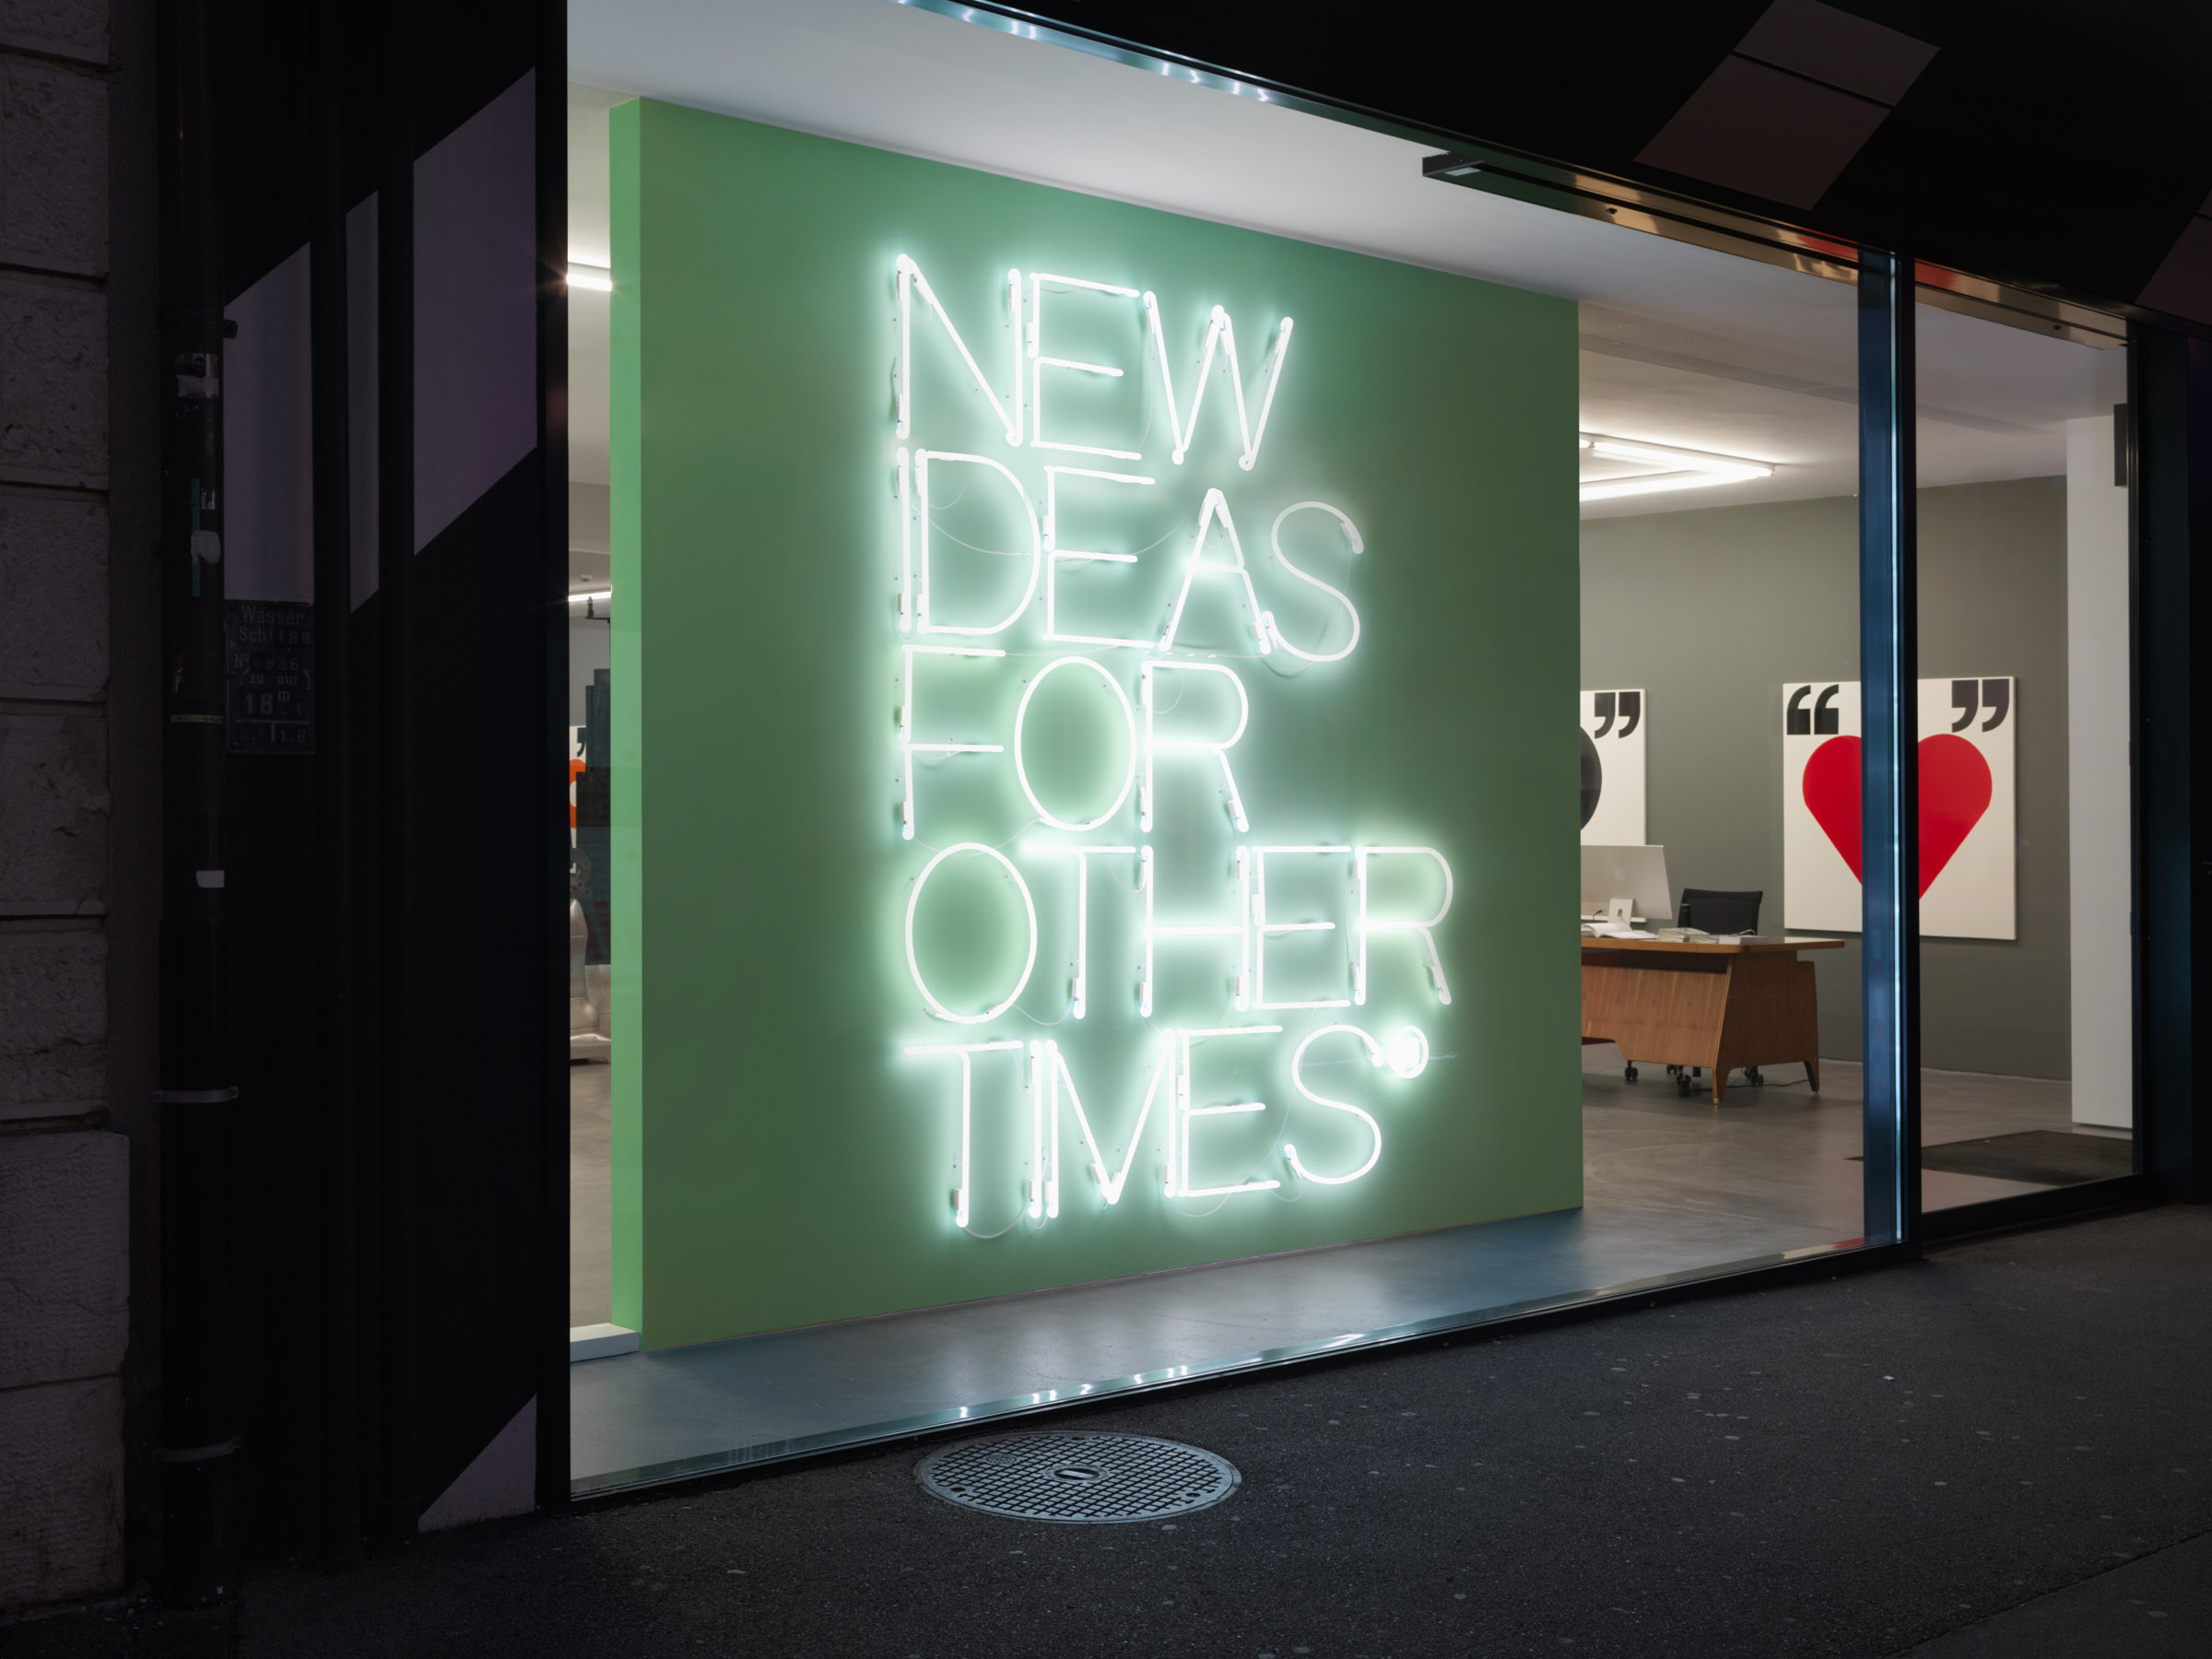 Exhibition: New Ideas for Other Times